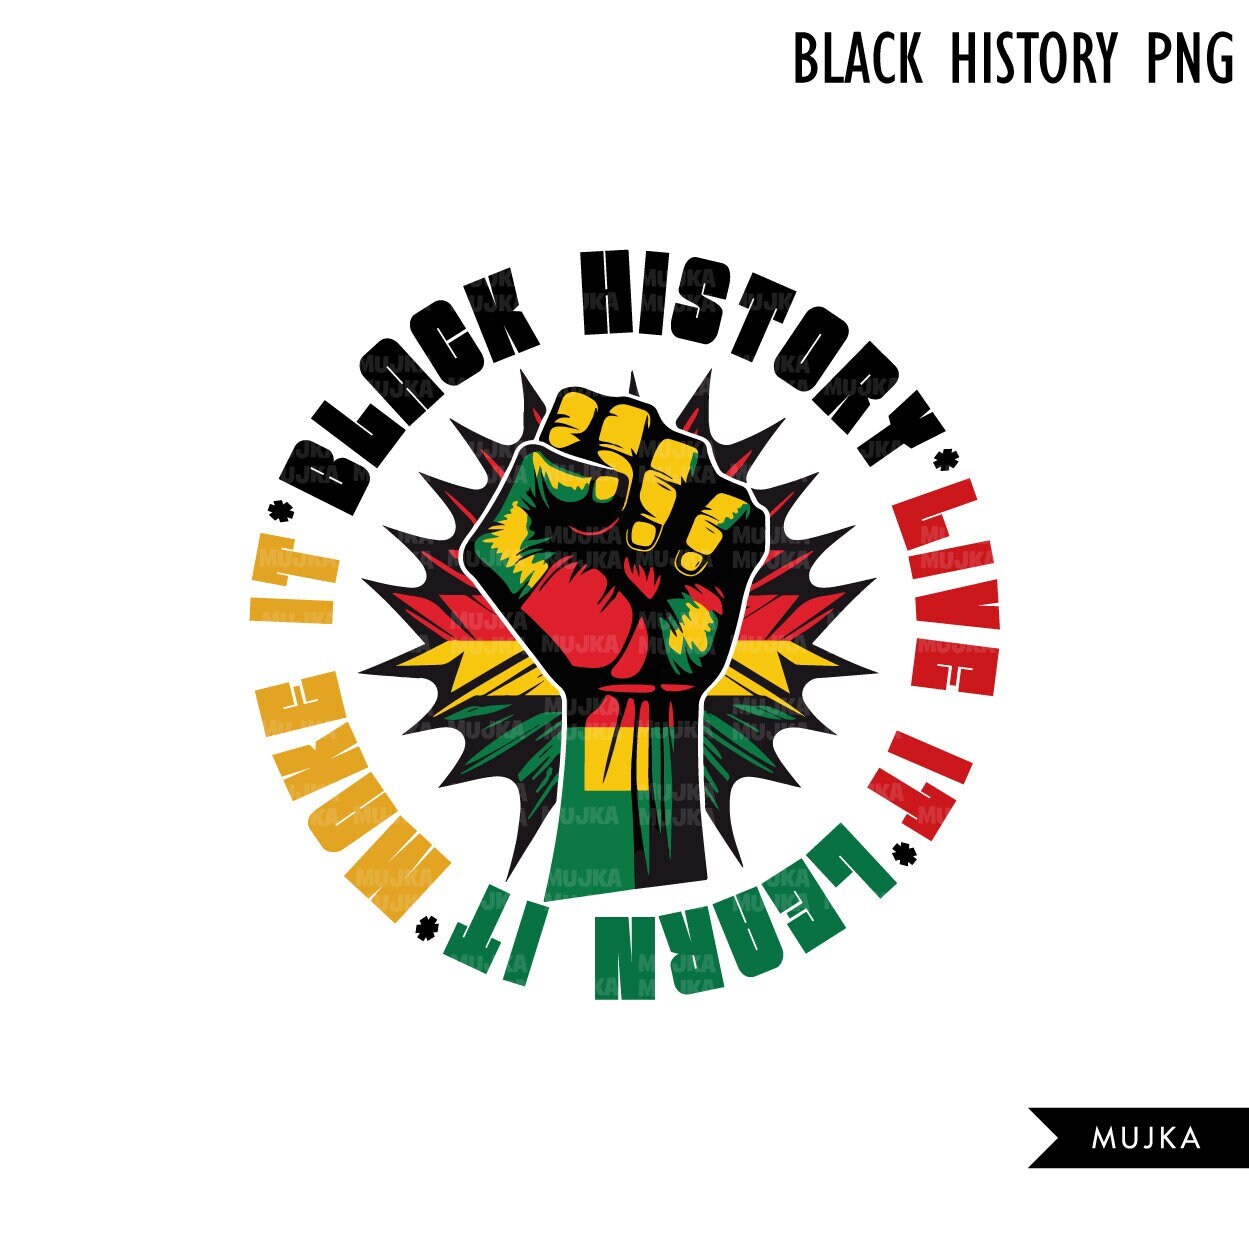 Black History, Black History Month PNG, Black History Fist, sublimation design, live it learn it make it, black history clipart, African png